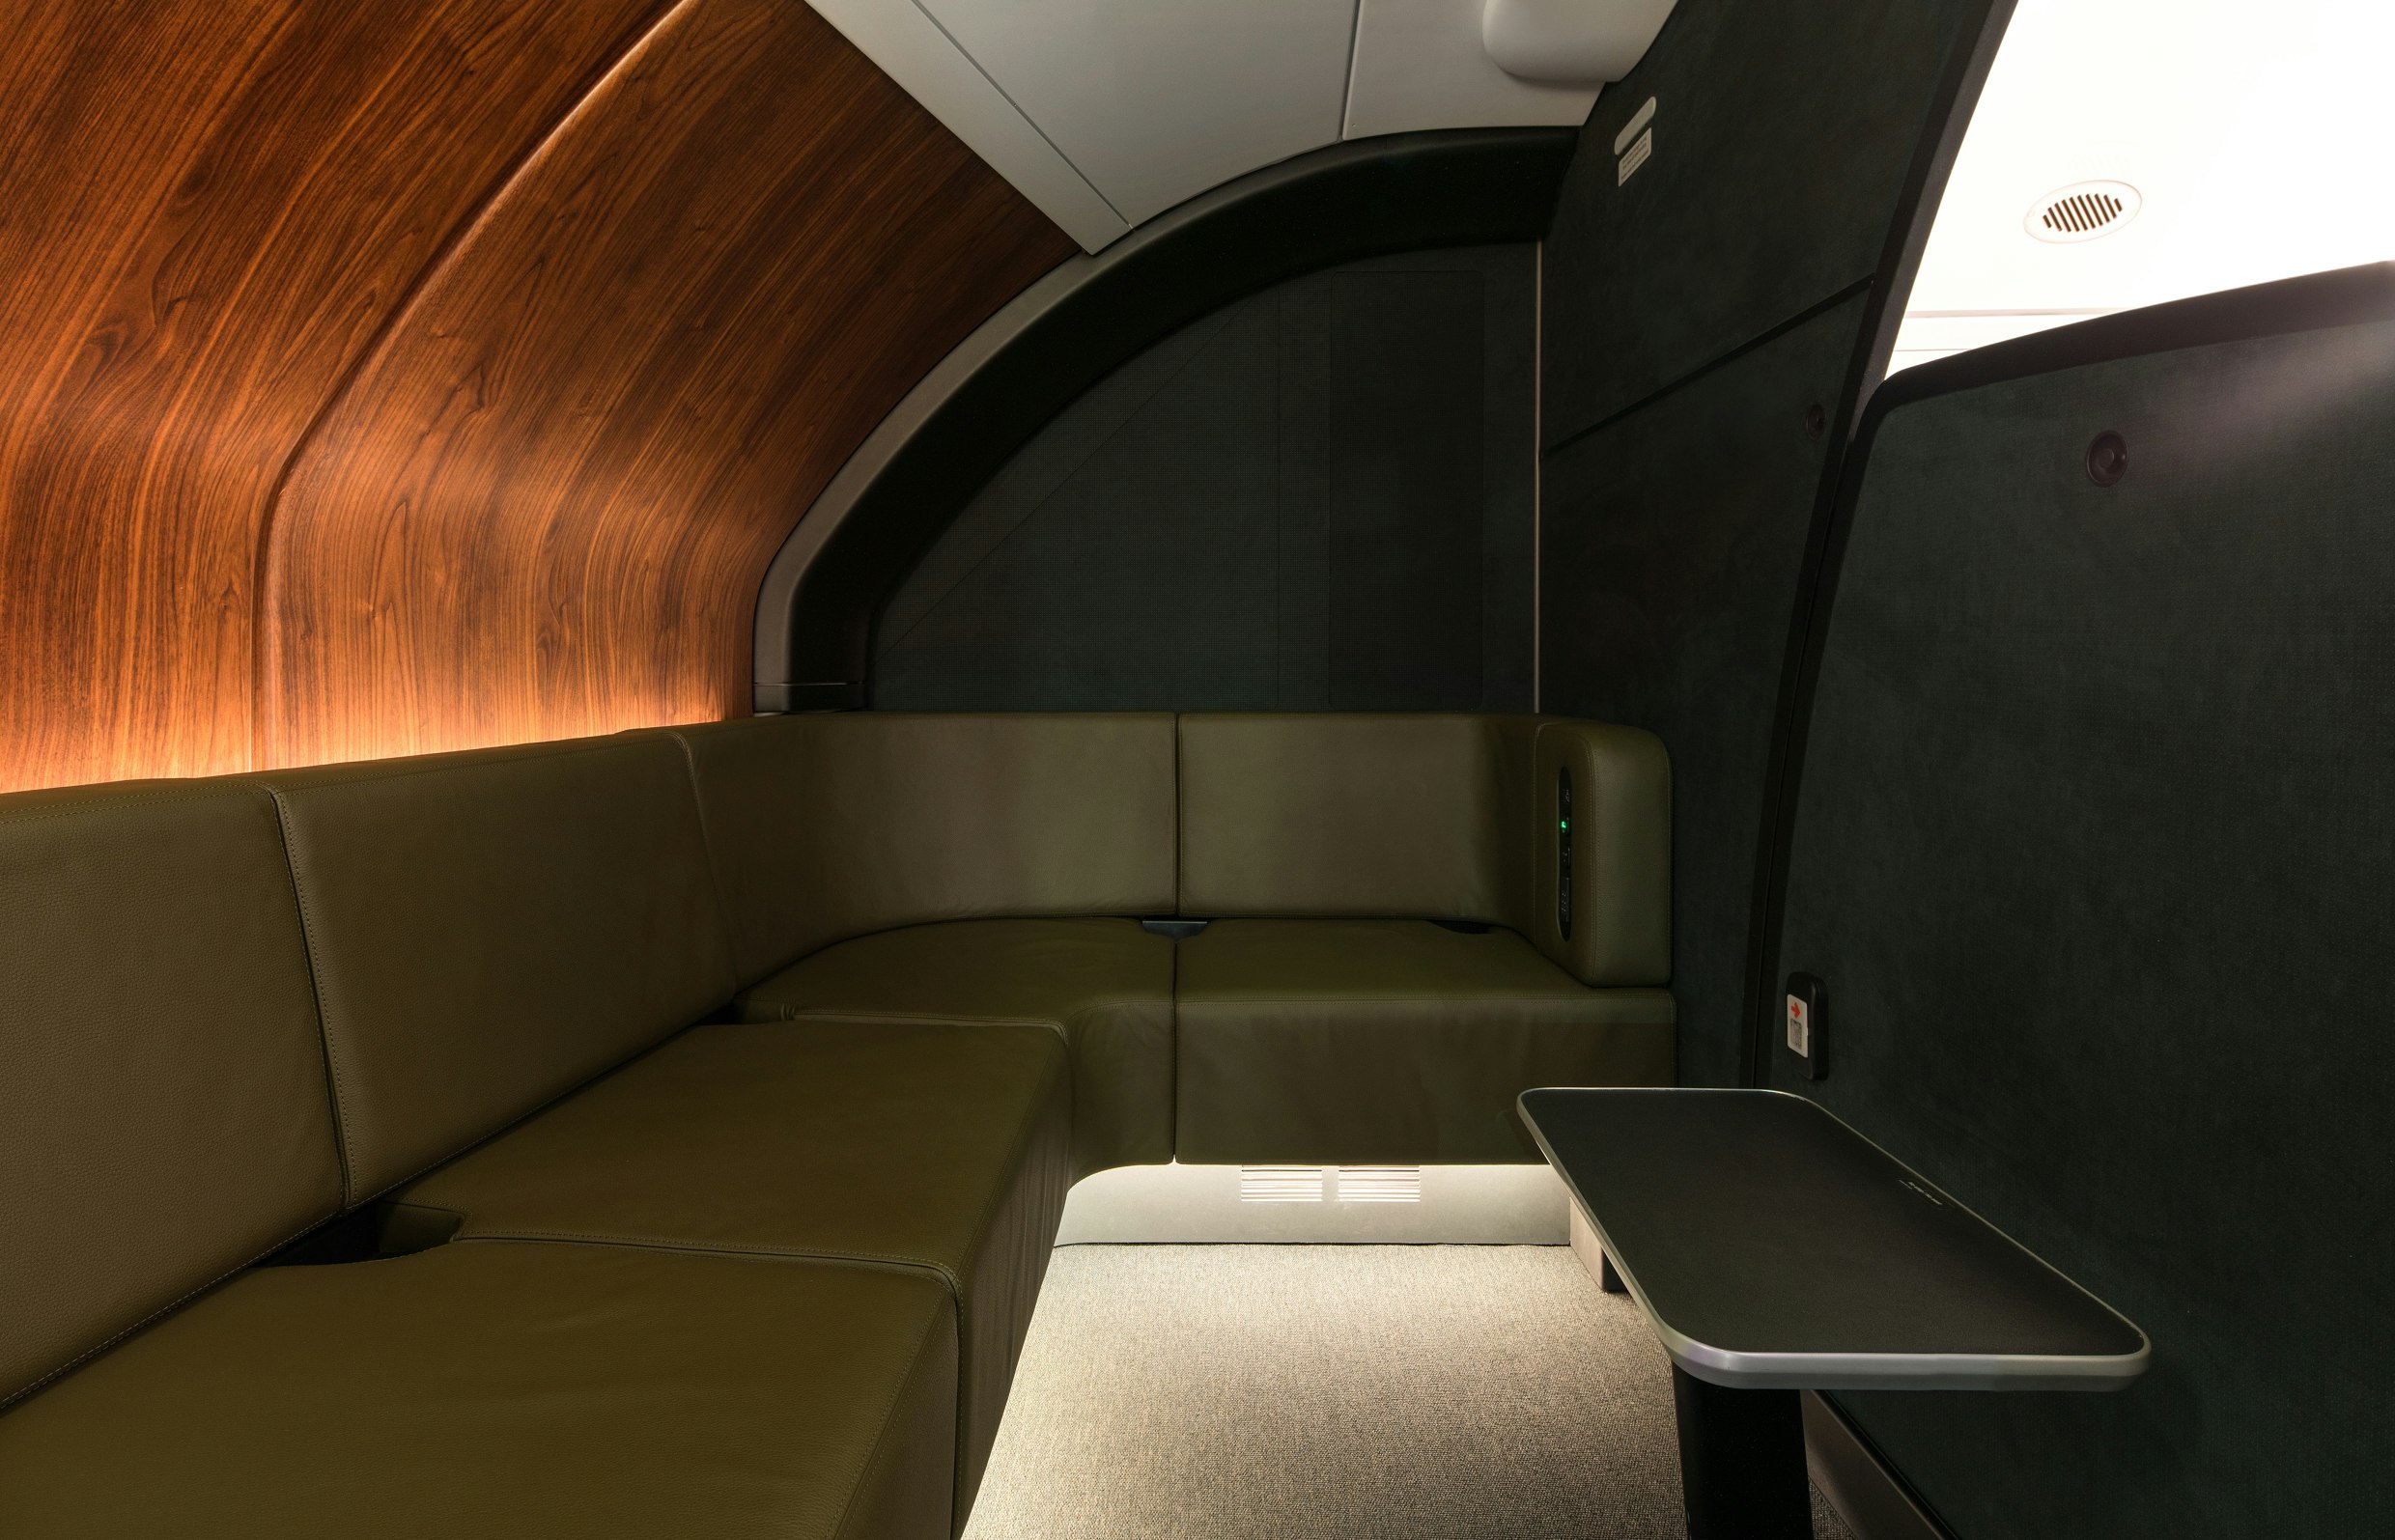 The new Qantas A380 onboard lounge with booth-type seating